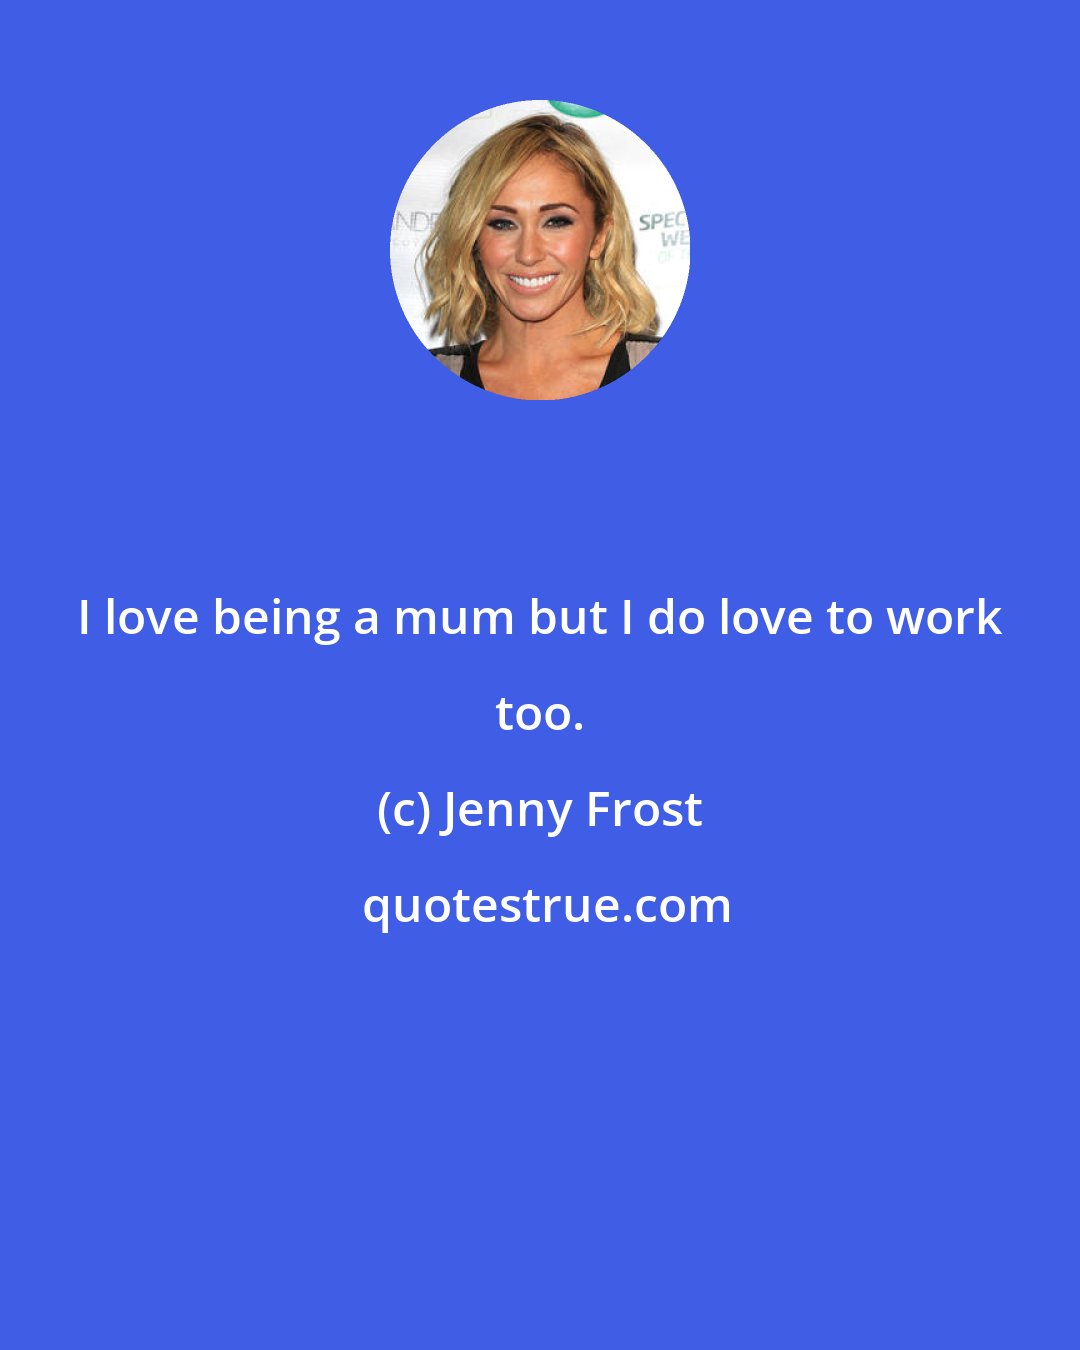 Jenny Frost: I love being a mum but I do love to work too.